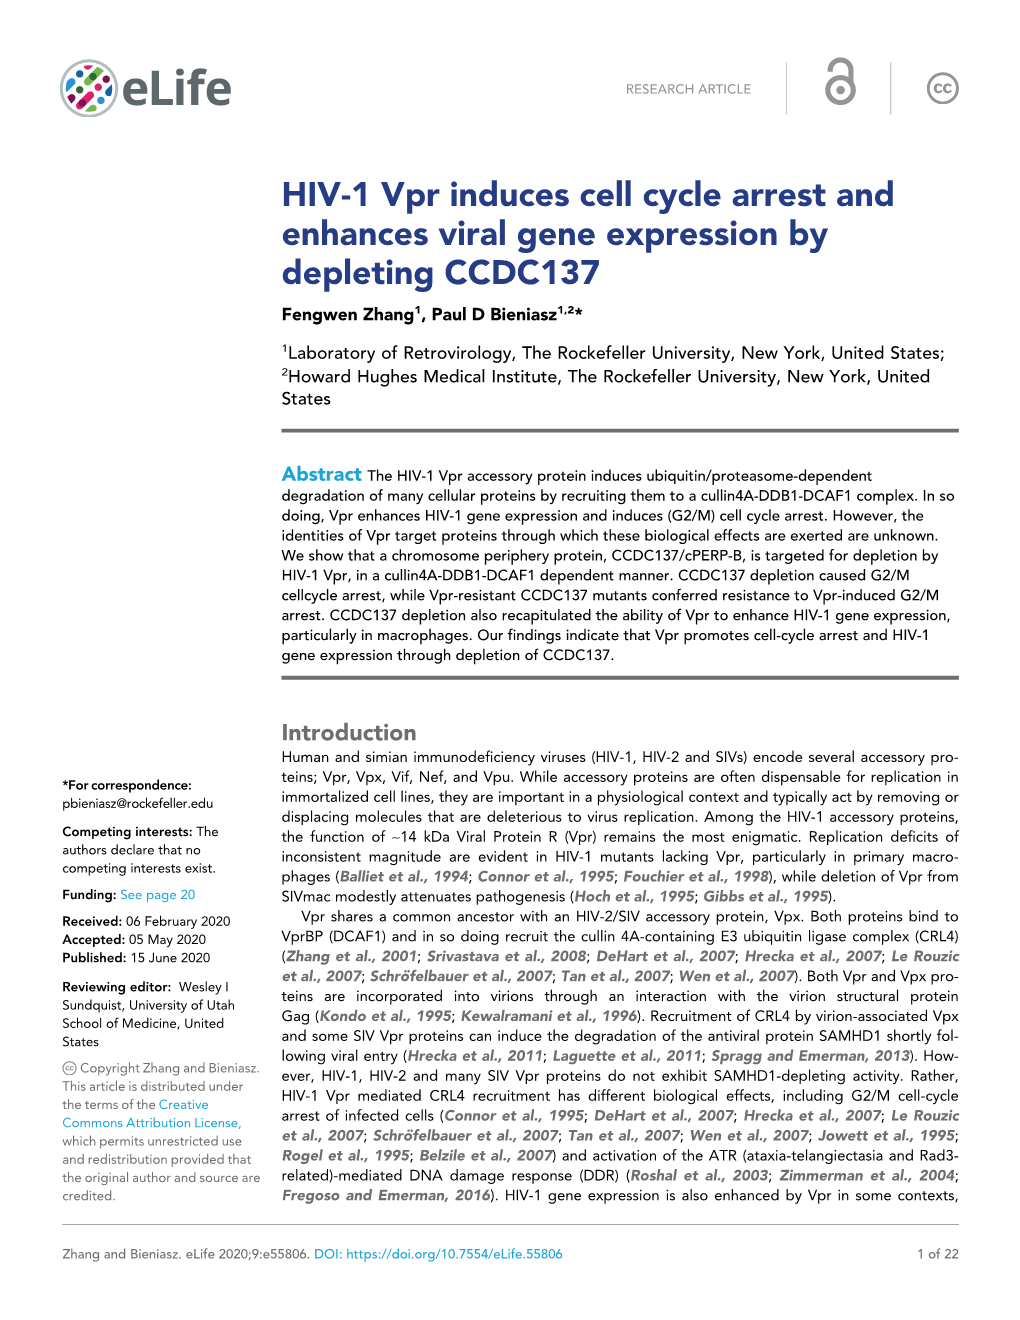 HIV-1 Vpr Induces Cell Cycle Arrest and Enhances Viral Gene Expression by Depleting CCDC137 Fengwen Zhang1, Paul D Bieniasz1,2*